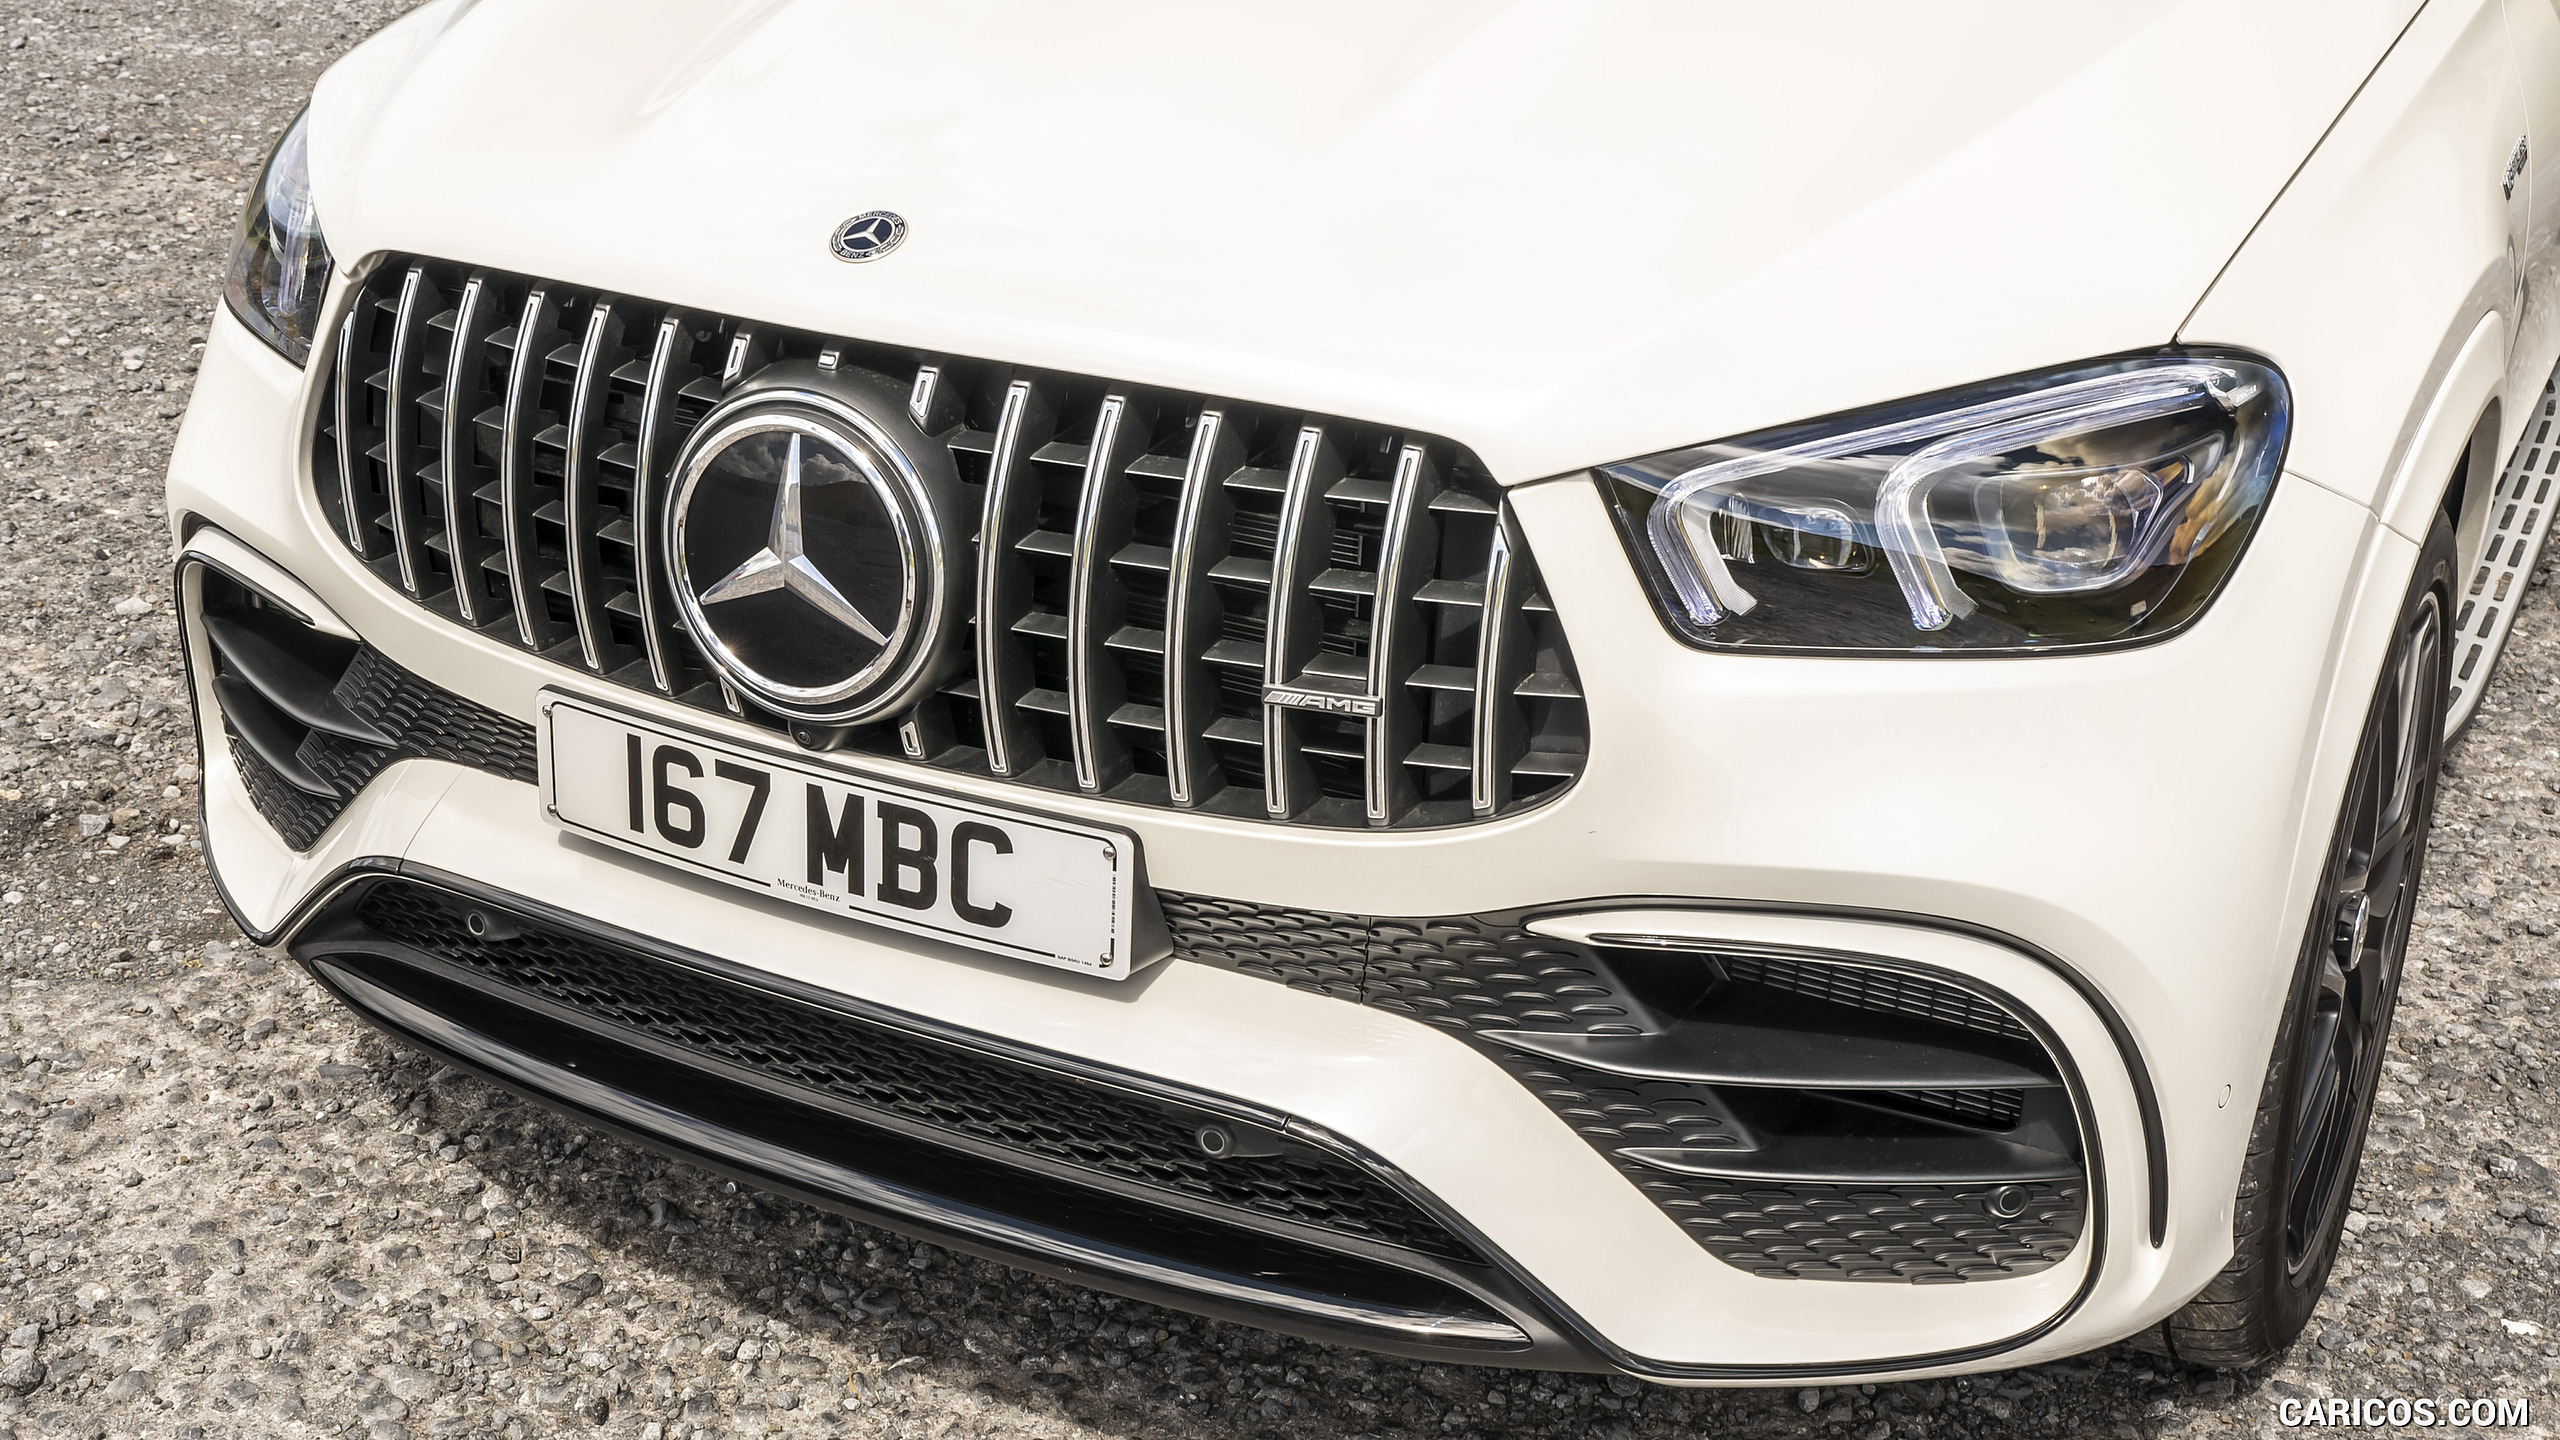 2021 Mercedes-AMG GLE 63 S 4MATIC (UK-Spec) - Grille, #149 of 187